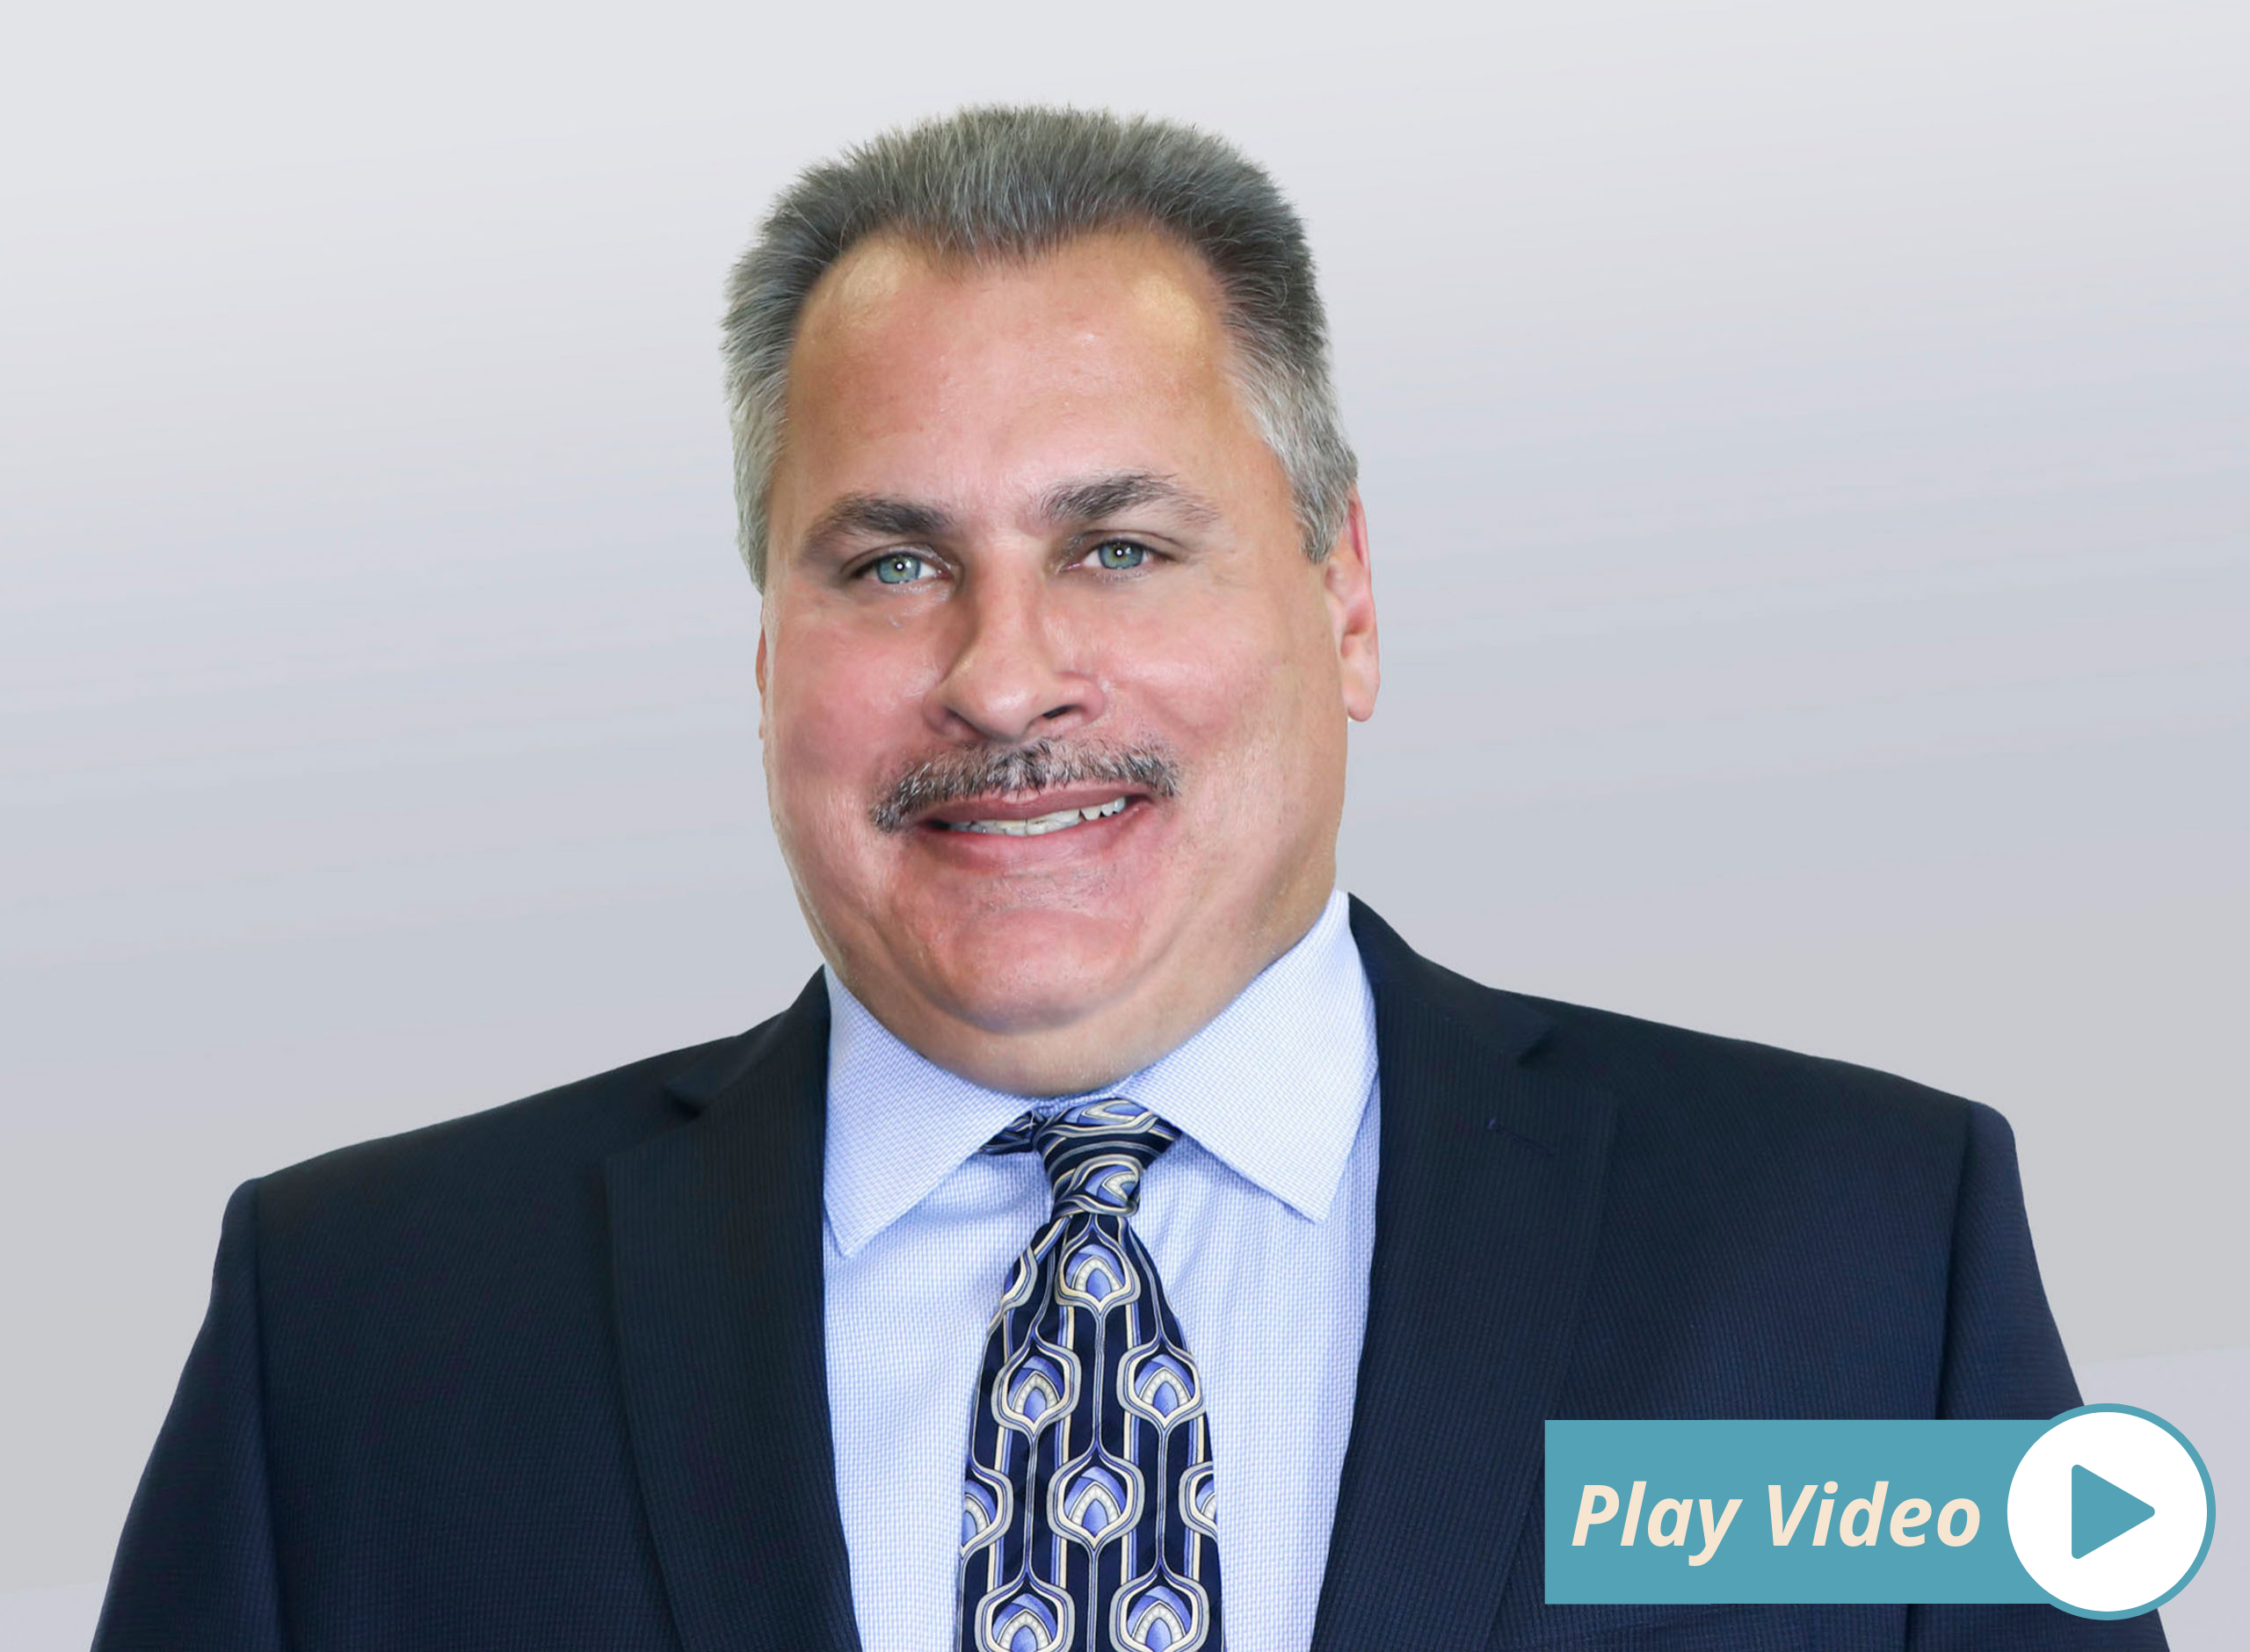 Douglas Monty, Senior Vice President - Director of Claims. Click to play a video introduction.